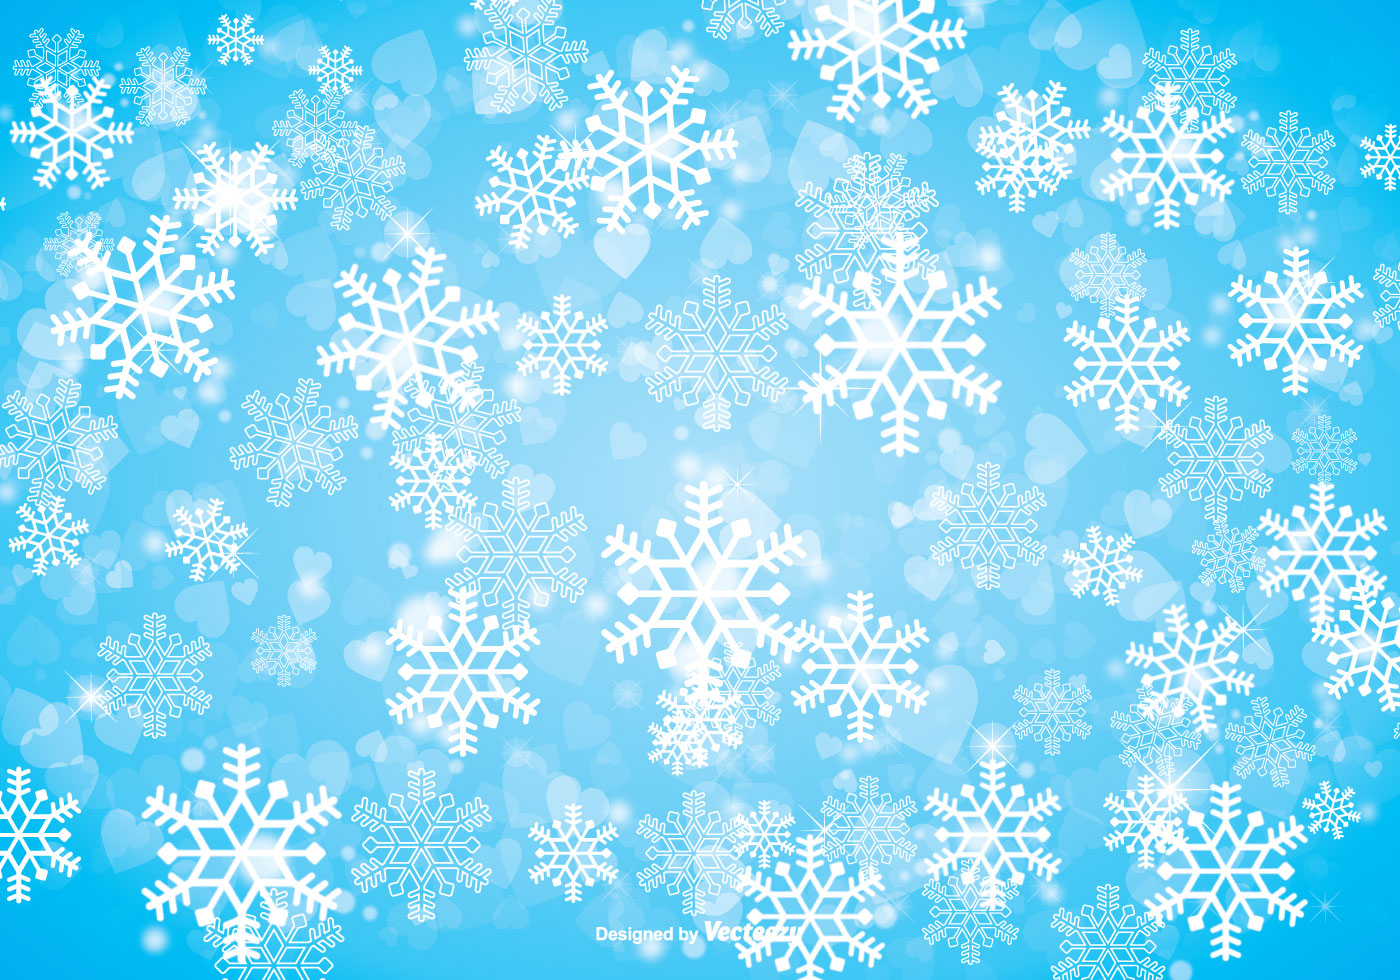 clipart snowflake background - photo #39